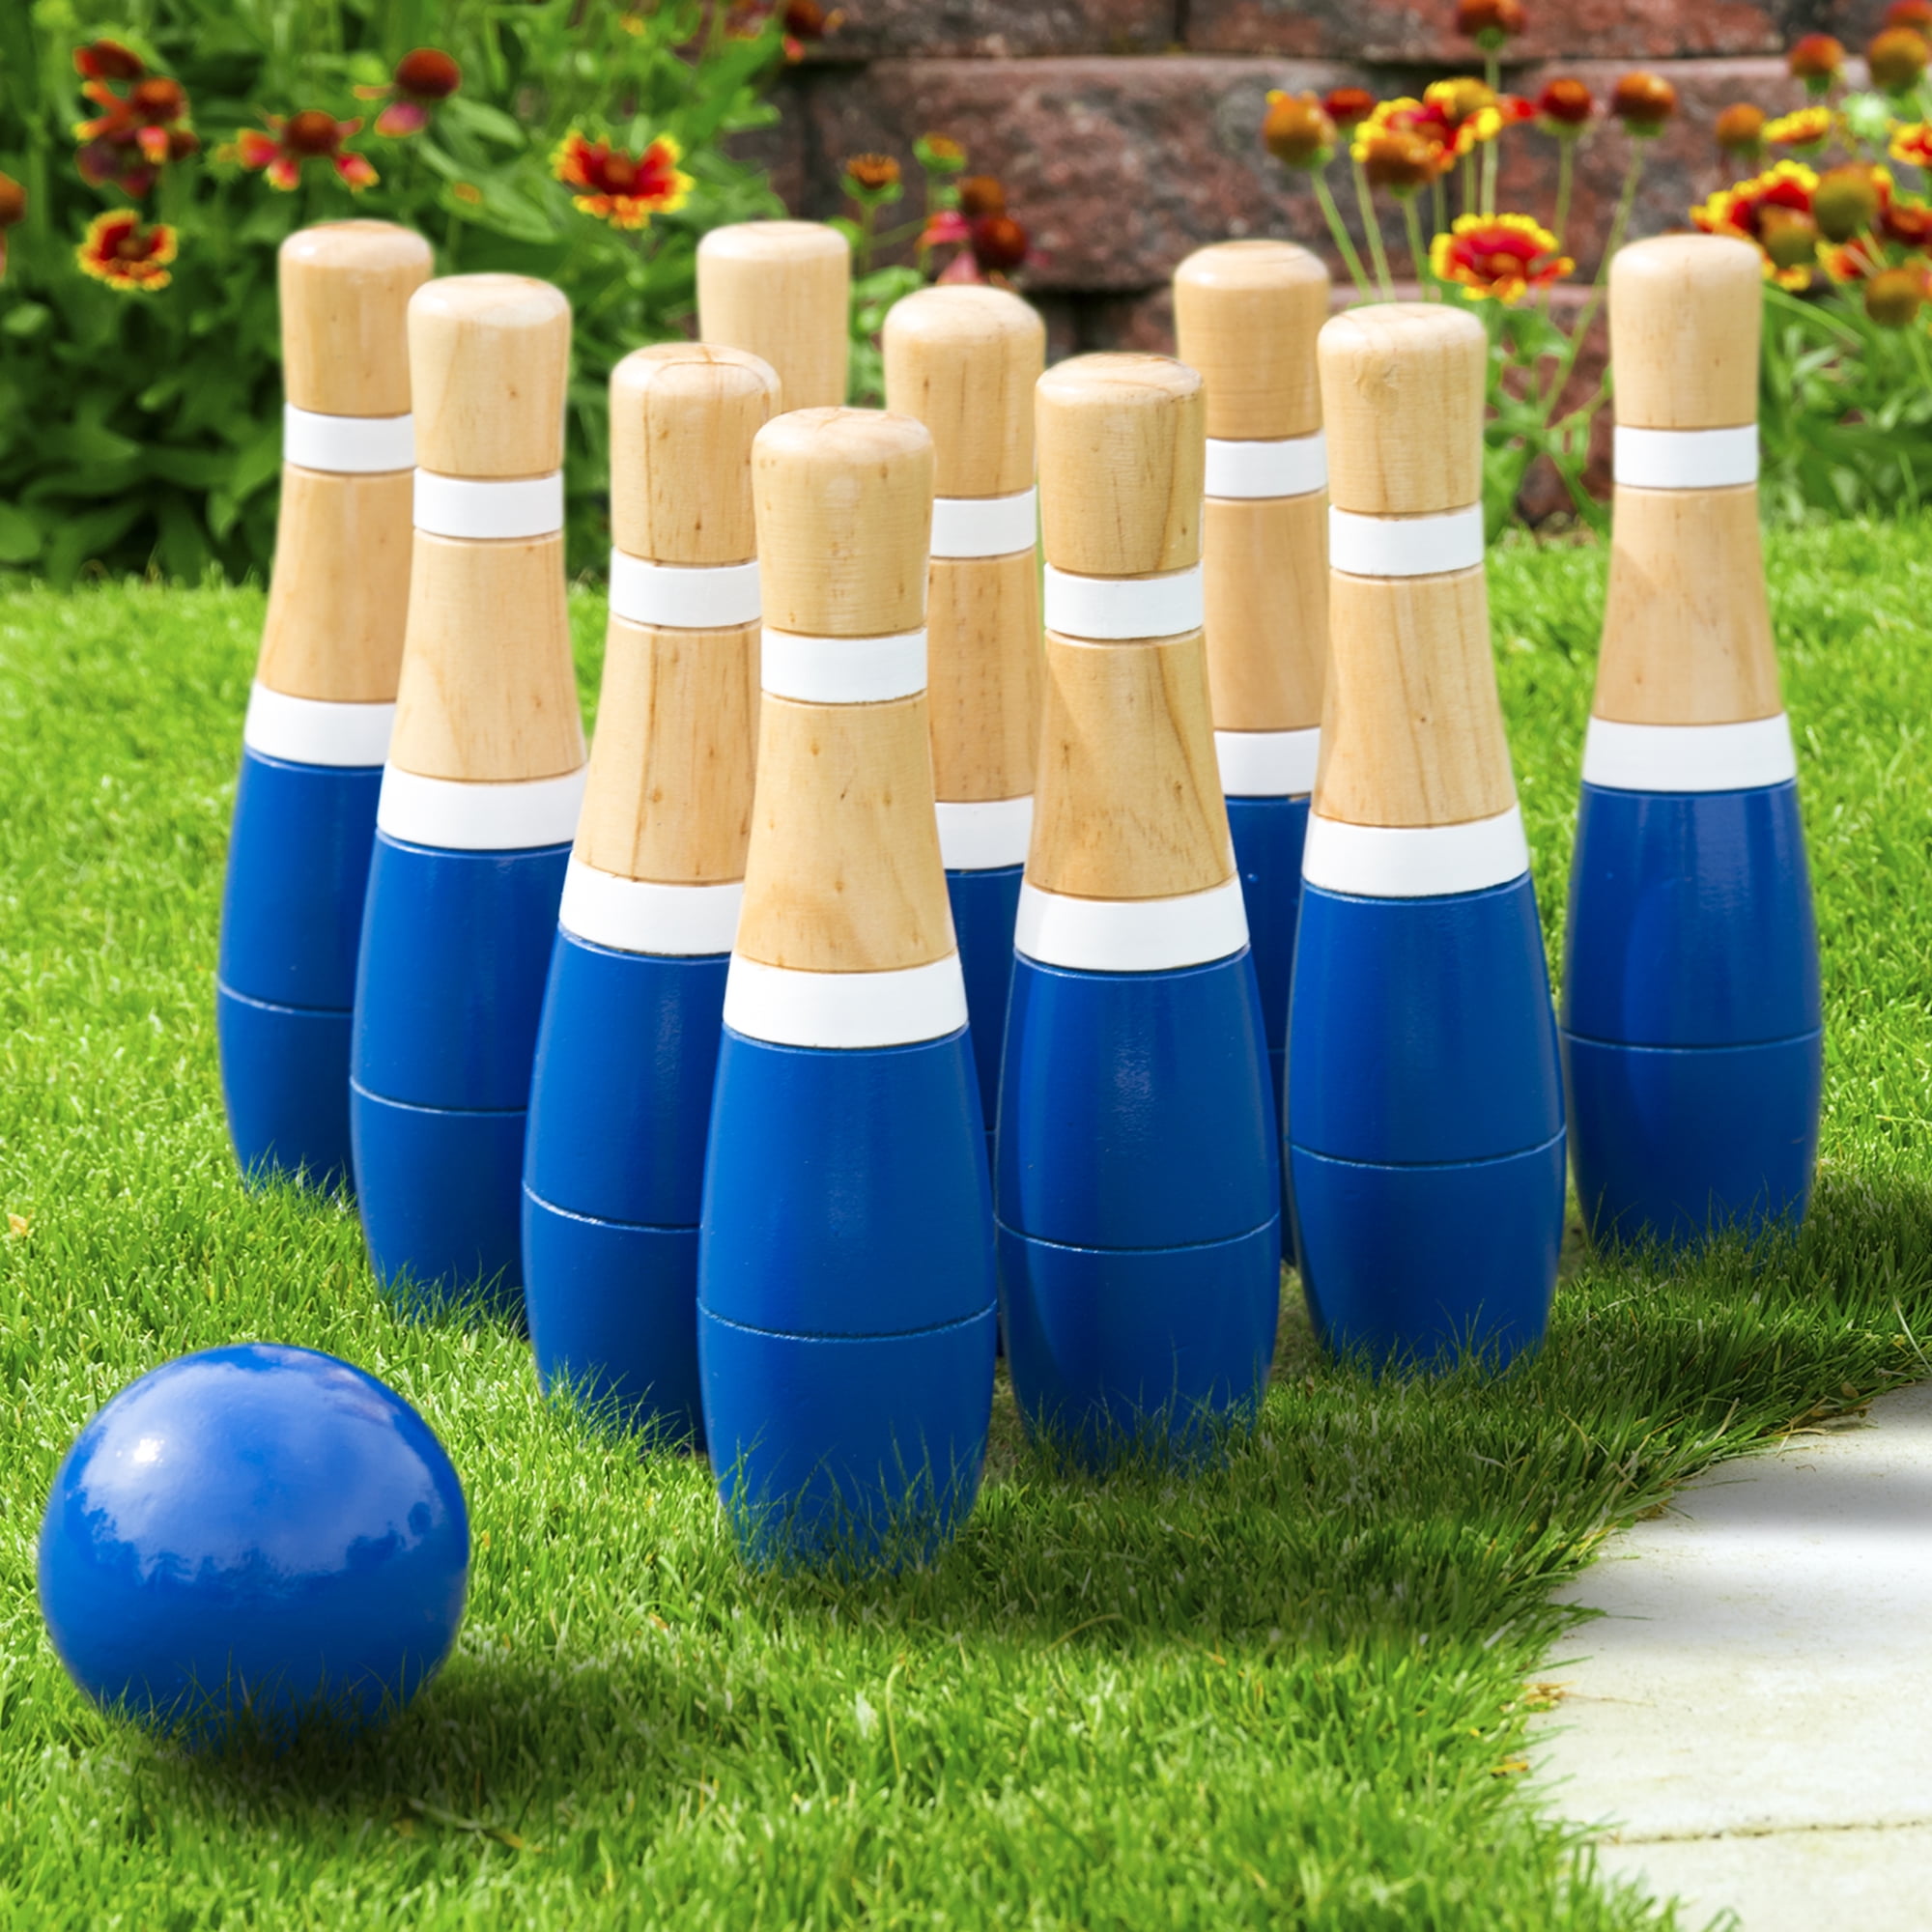 Miniature Bowling Game 10pcs Wooden Pins with 2" Wood Ball Kids Activities 